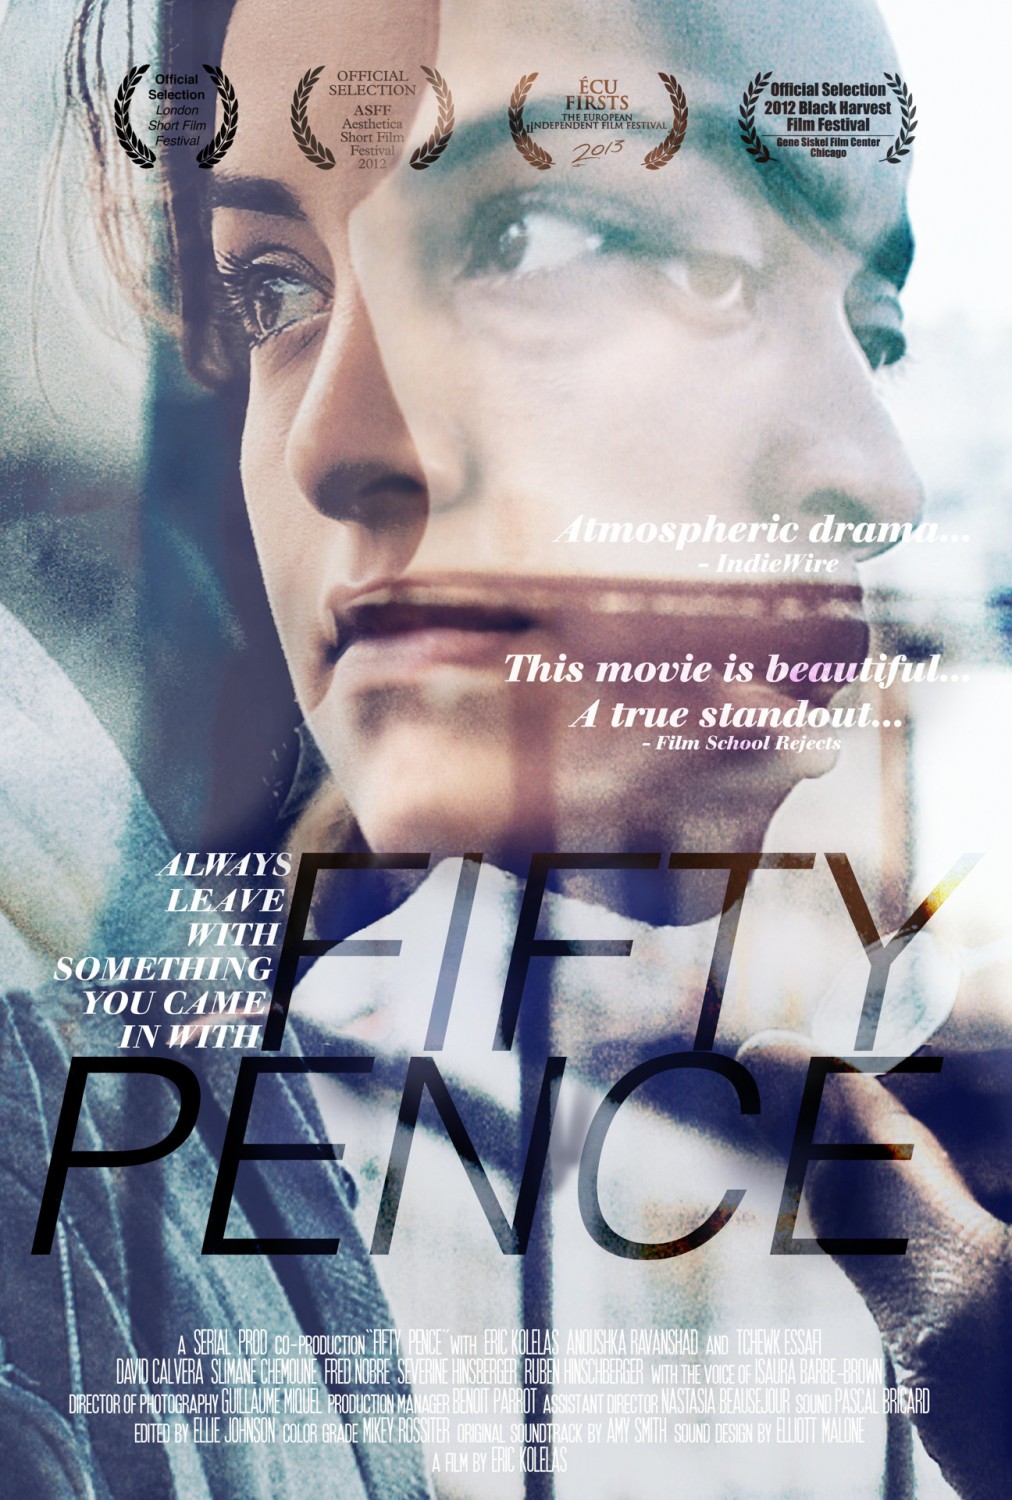 Extra Large Movie Poster Image for Fifty Pence